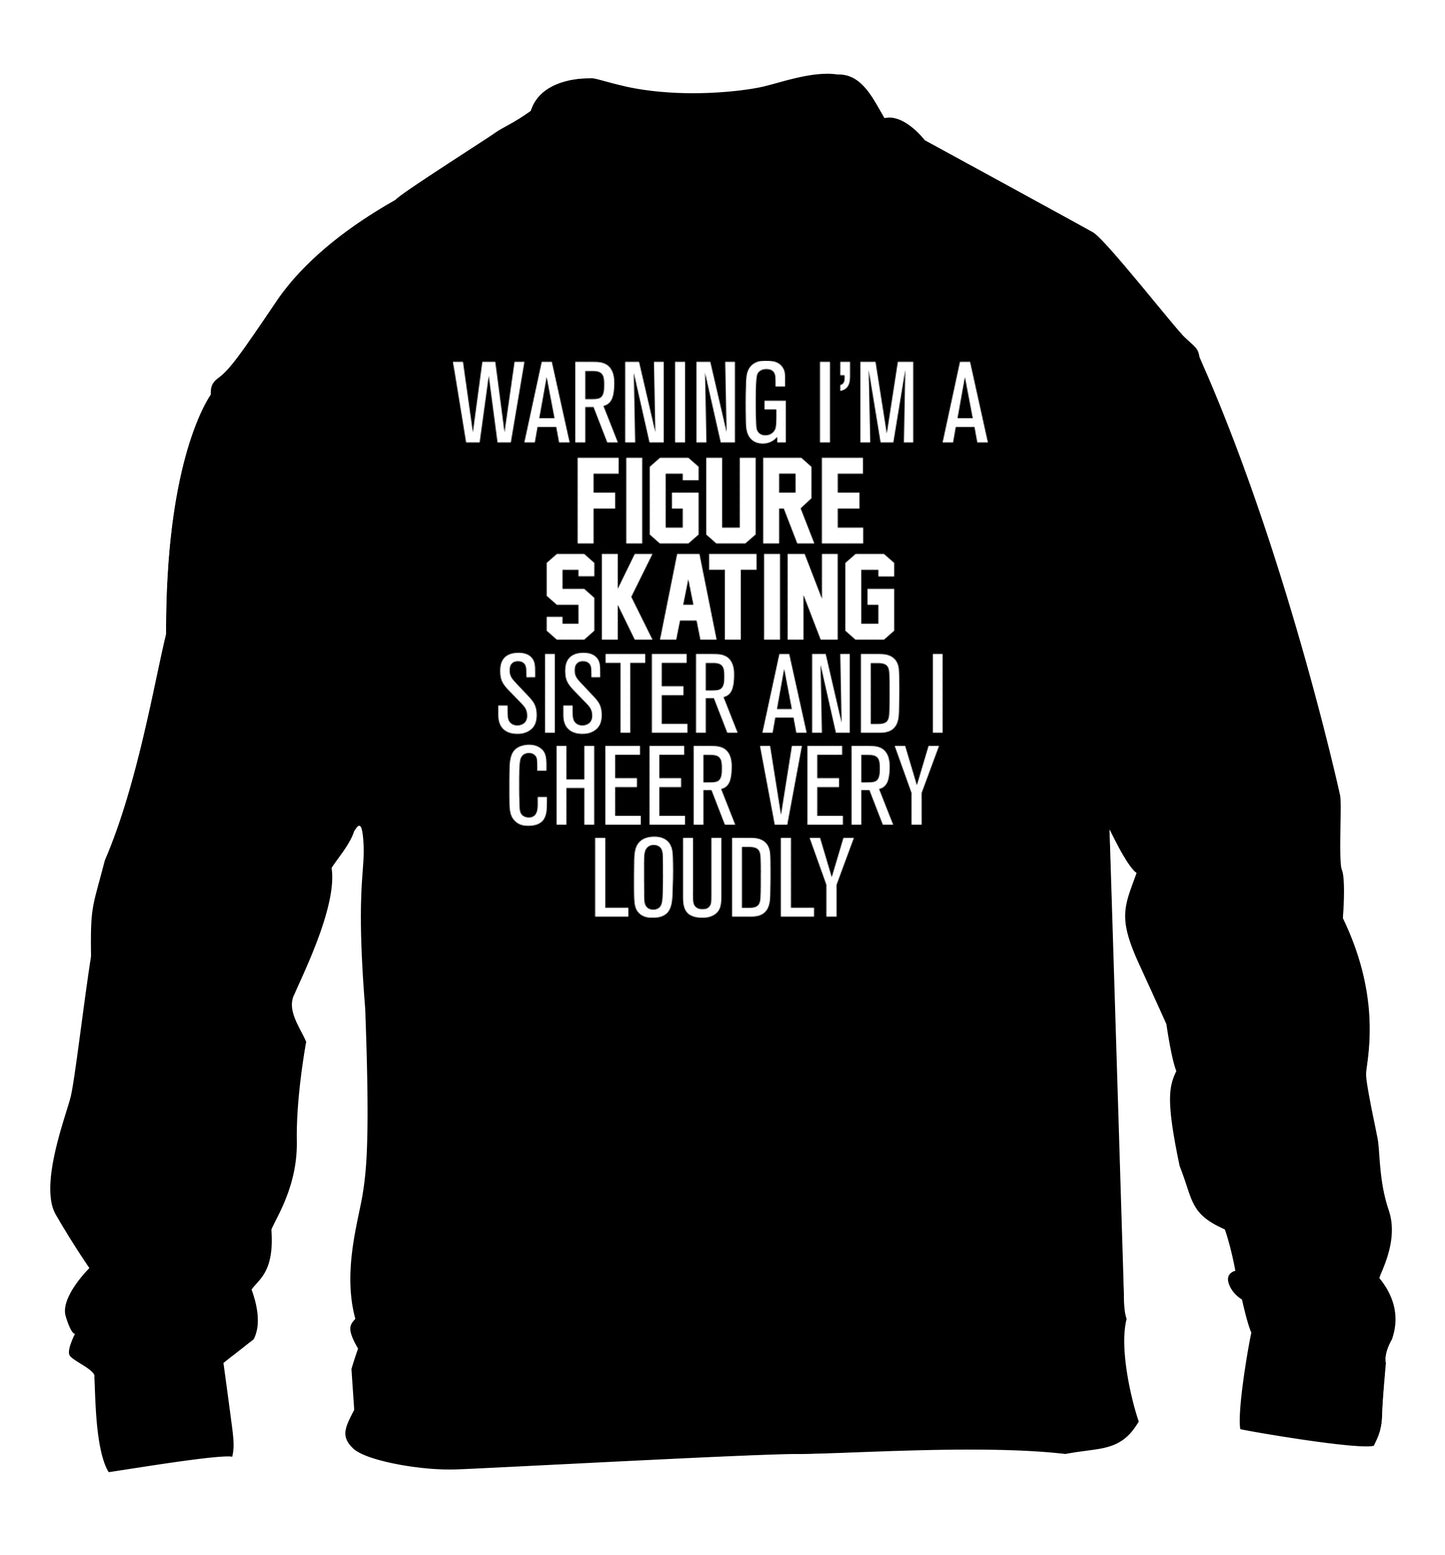 Warning I'm a figure skating sister and I cheer very loudly children's black sweater 12-14 Years